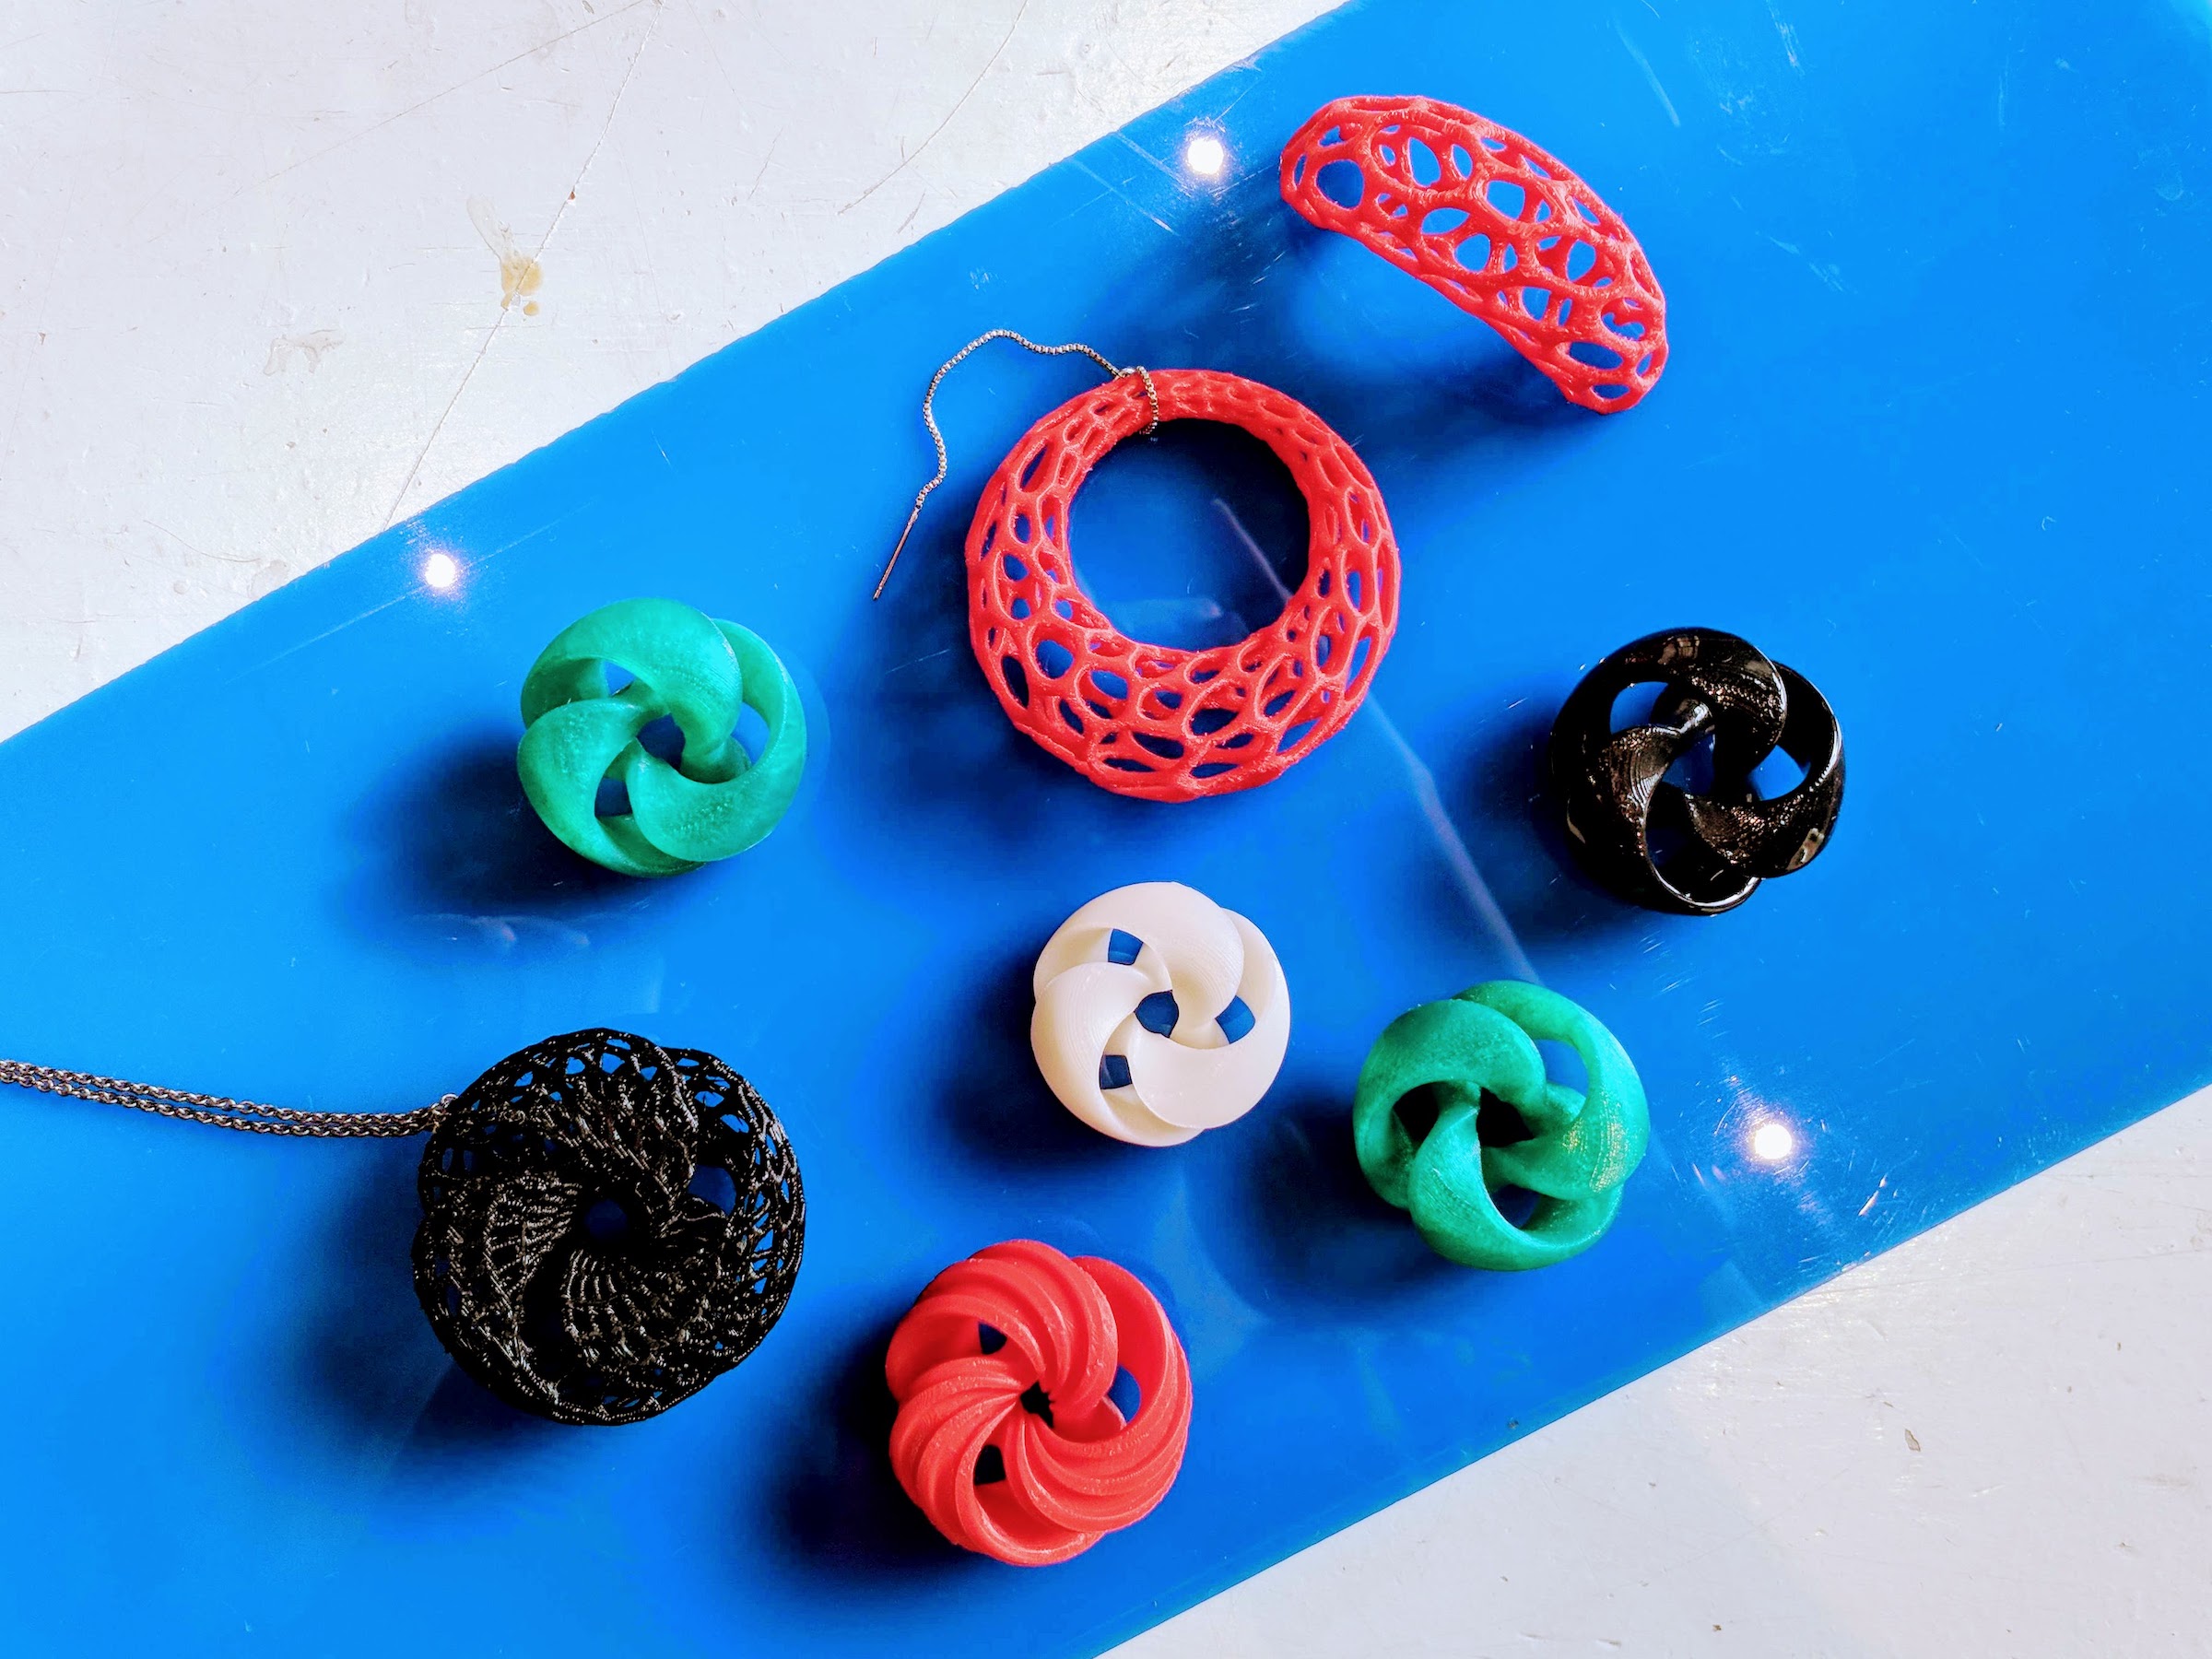 A jewelry collection of 3D printed pieces, based on mathematical surfaces